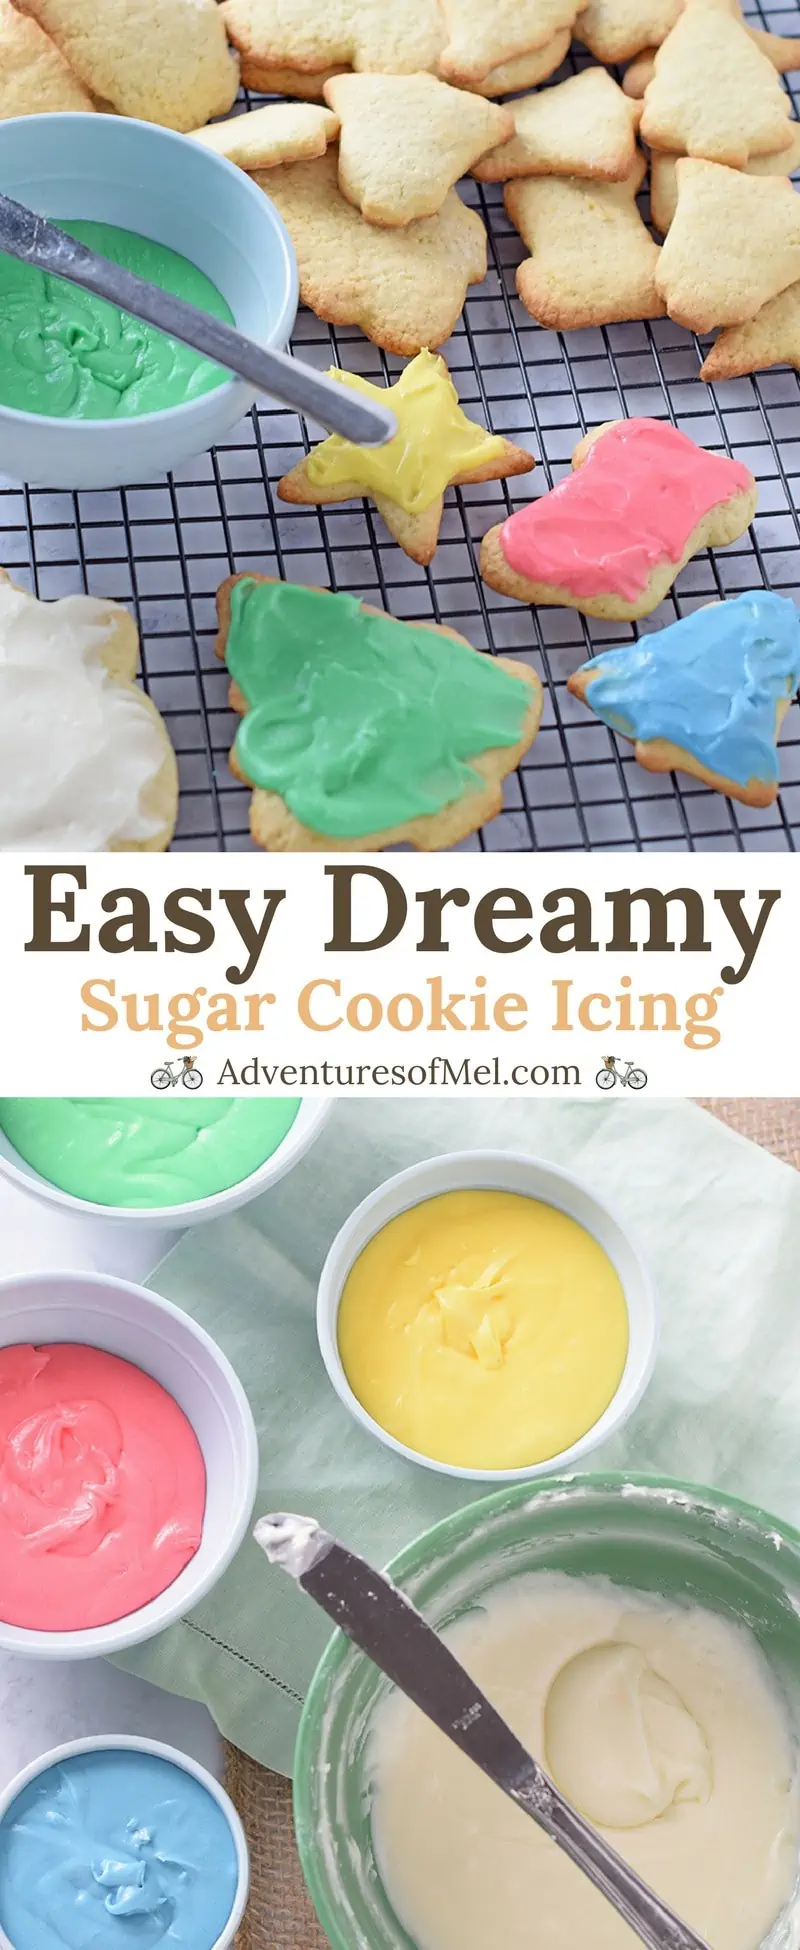 Easy Sugar Cookie Icing, made with powdered sugar and a flavorful secret ingredient. So creamy delicious, my favorite recipe for cookie decorating.